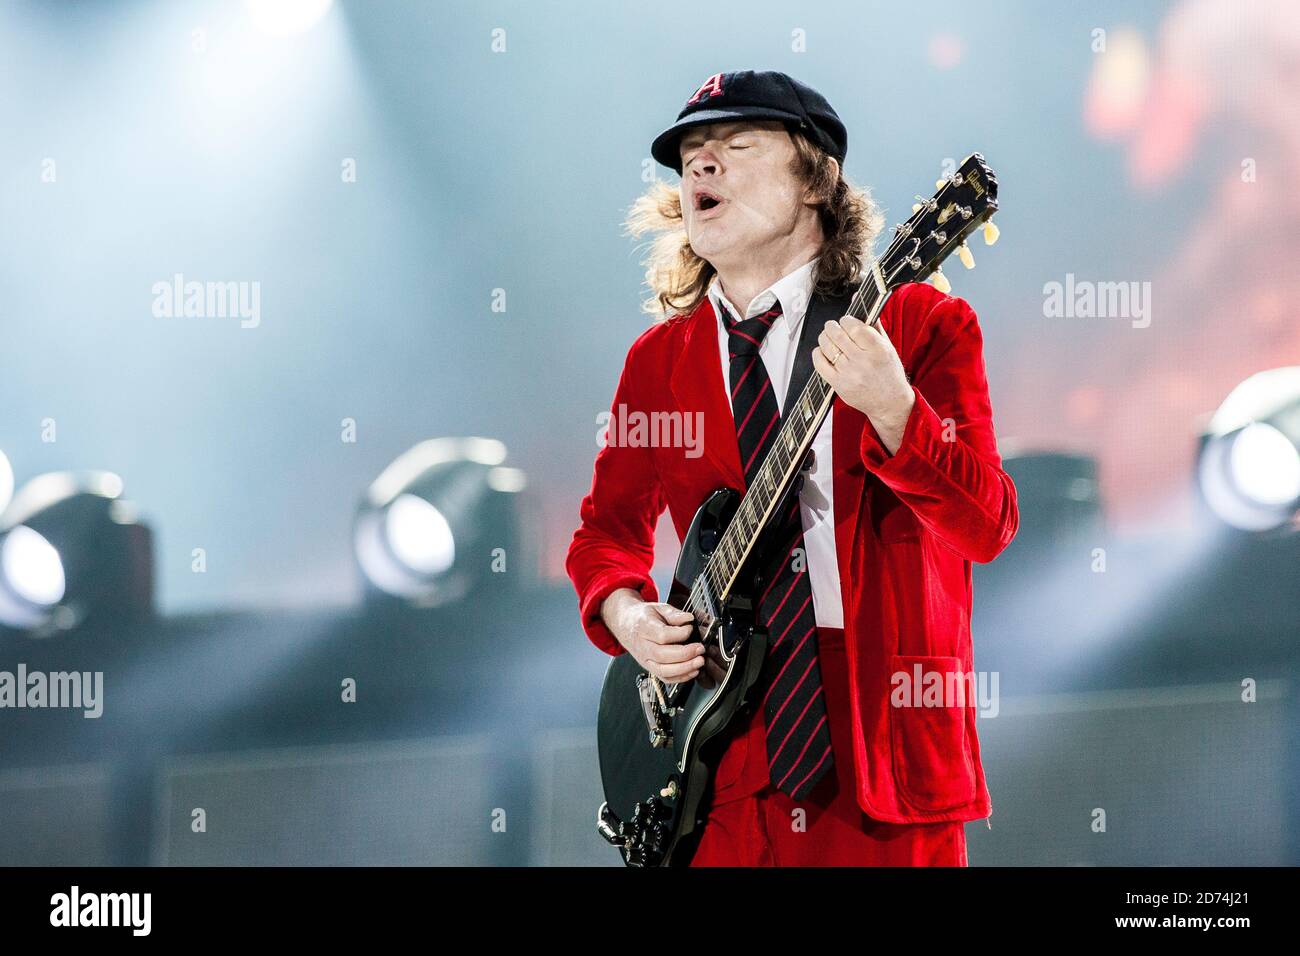 Copenhagen, Denmark. 15th, 2015. The Australian band AC/DC performs a live concert at Dyreskuepladsen in Roskilde as of the or Bust World 2015 Tour. Here guitarist Angus Young